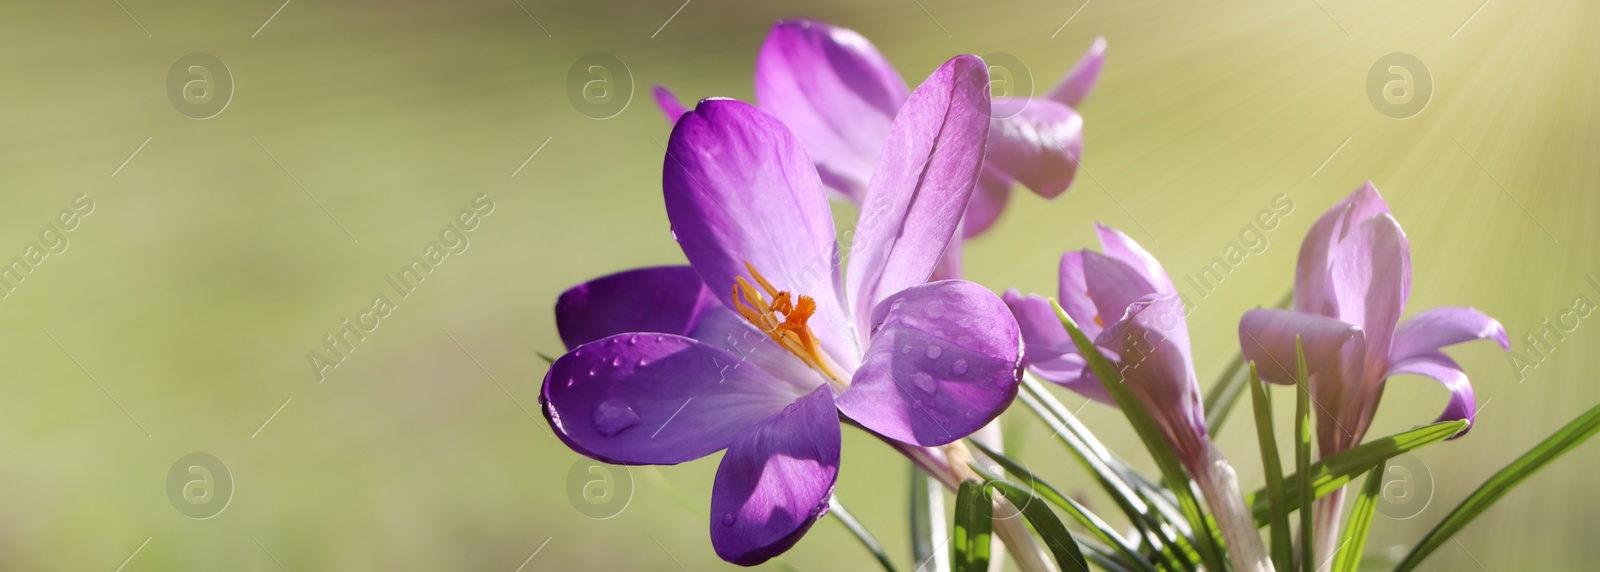 Image of Beautiful purple crocus flowers growing outdoors, closeup view with space for text. Banner design 